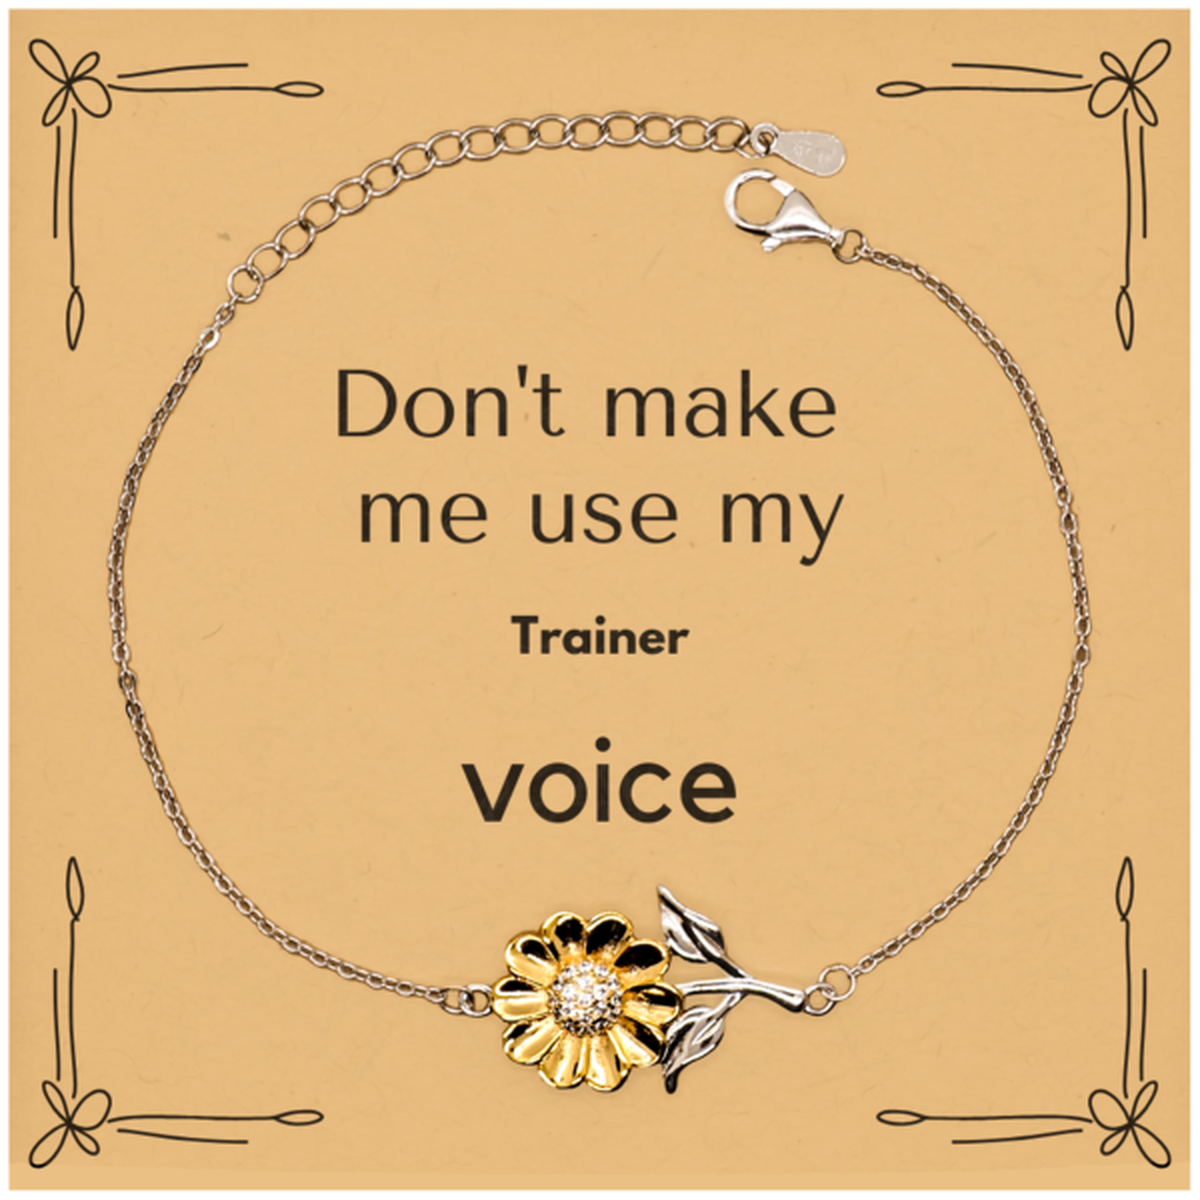 Don't make me use my Trainer voice, Sarcasm Trainer Card Gifts, Christmas Trainer Sunflower Bracelet Birthday Unique Gifts For Trainer Coworkers, Men, Women, Colleague, Friends